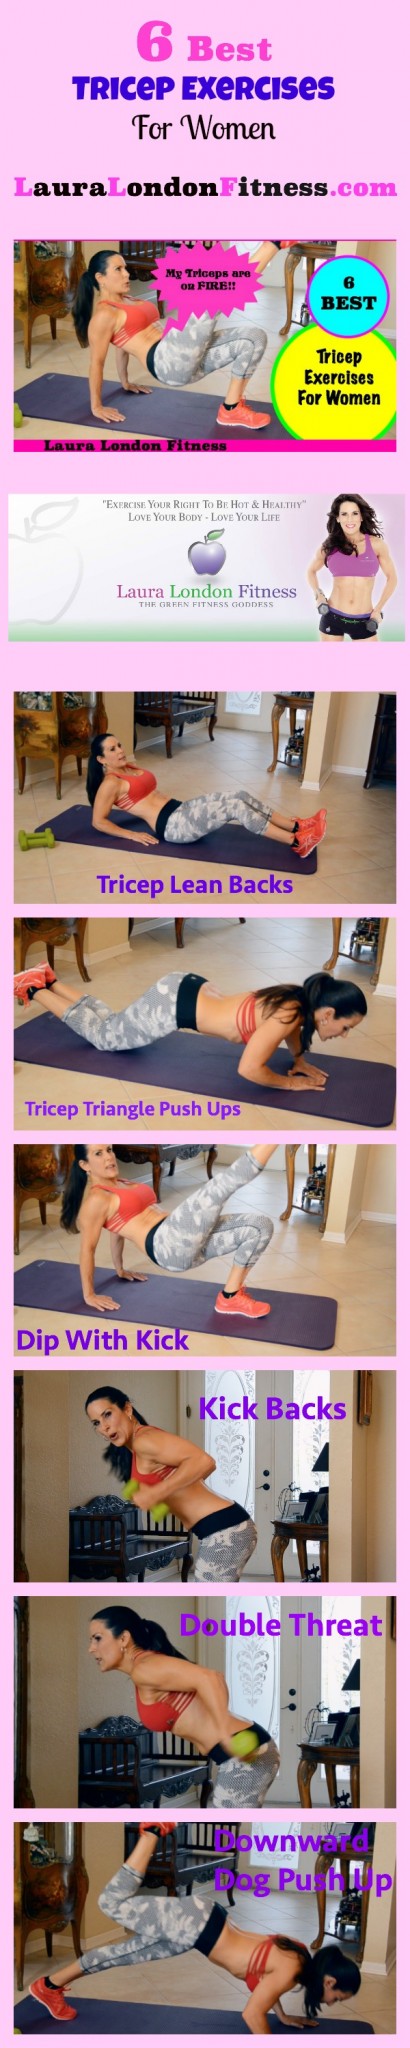 6 best tricep exercises